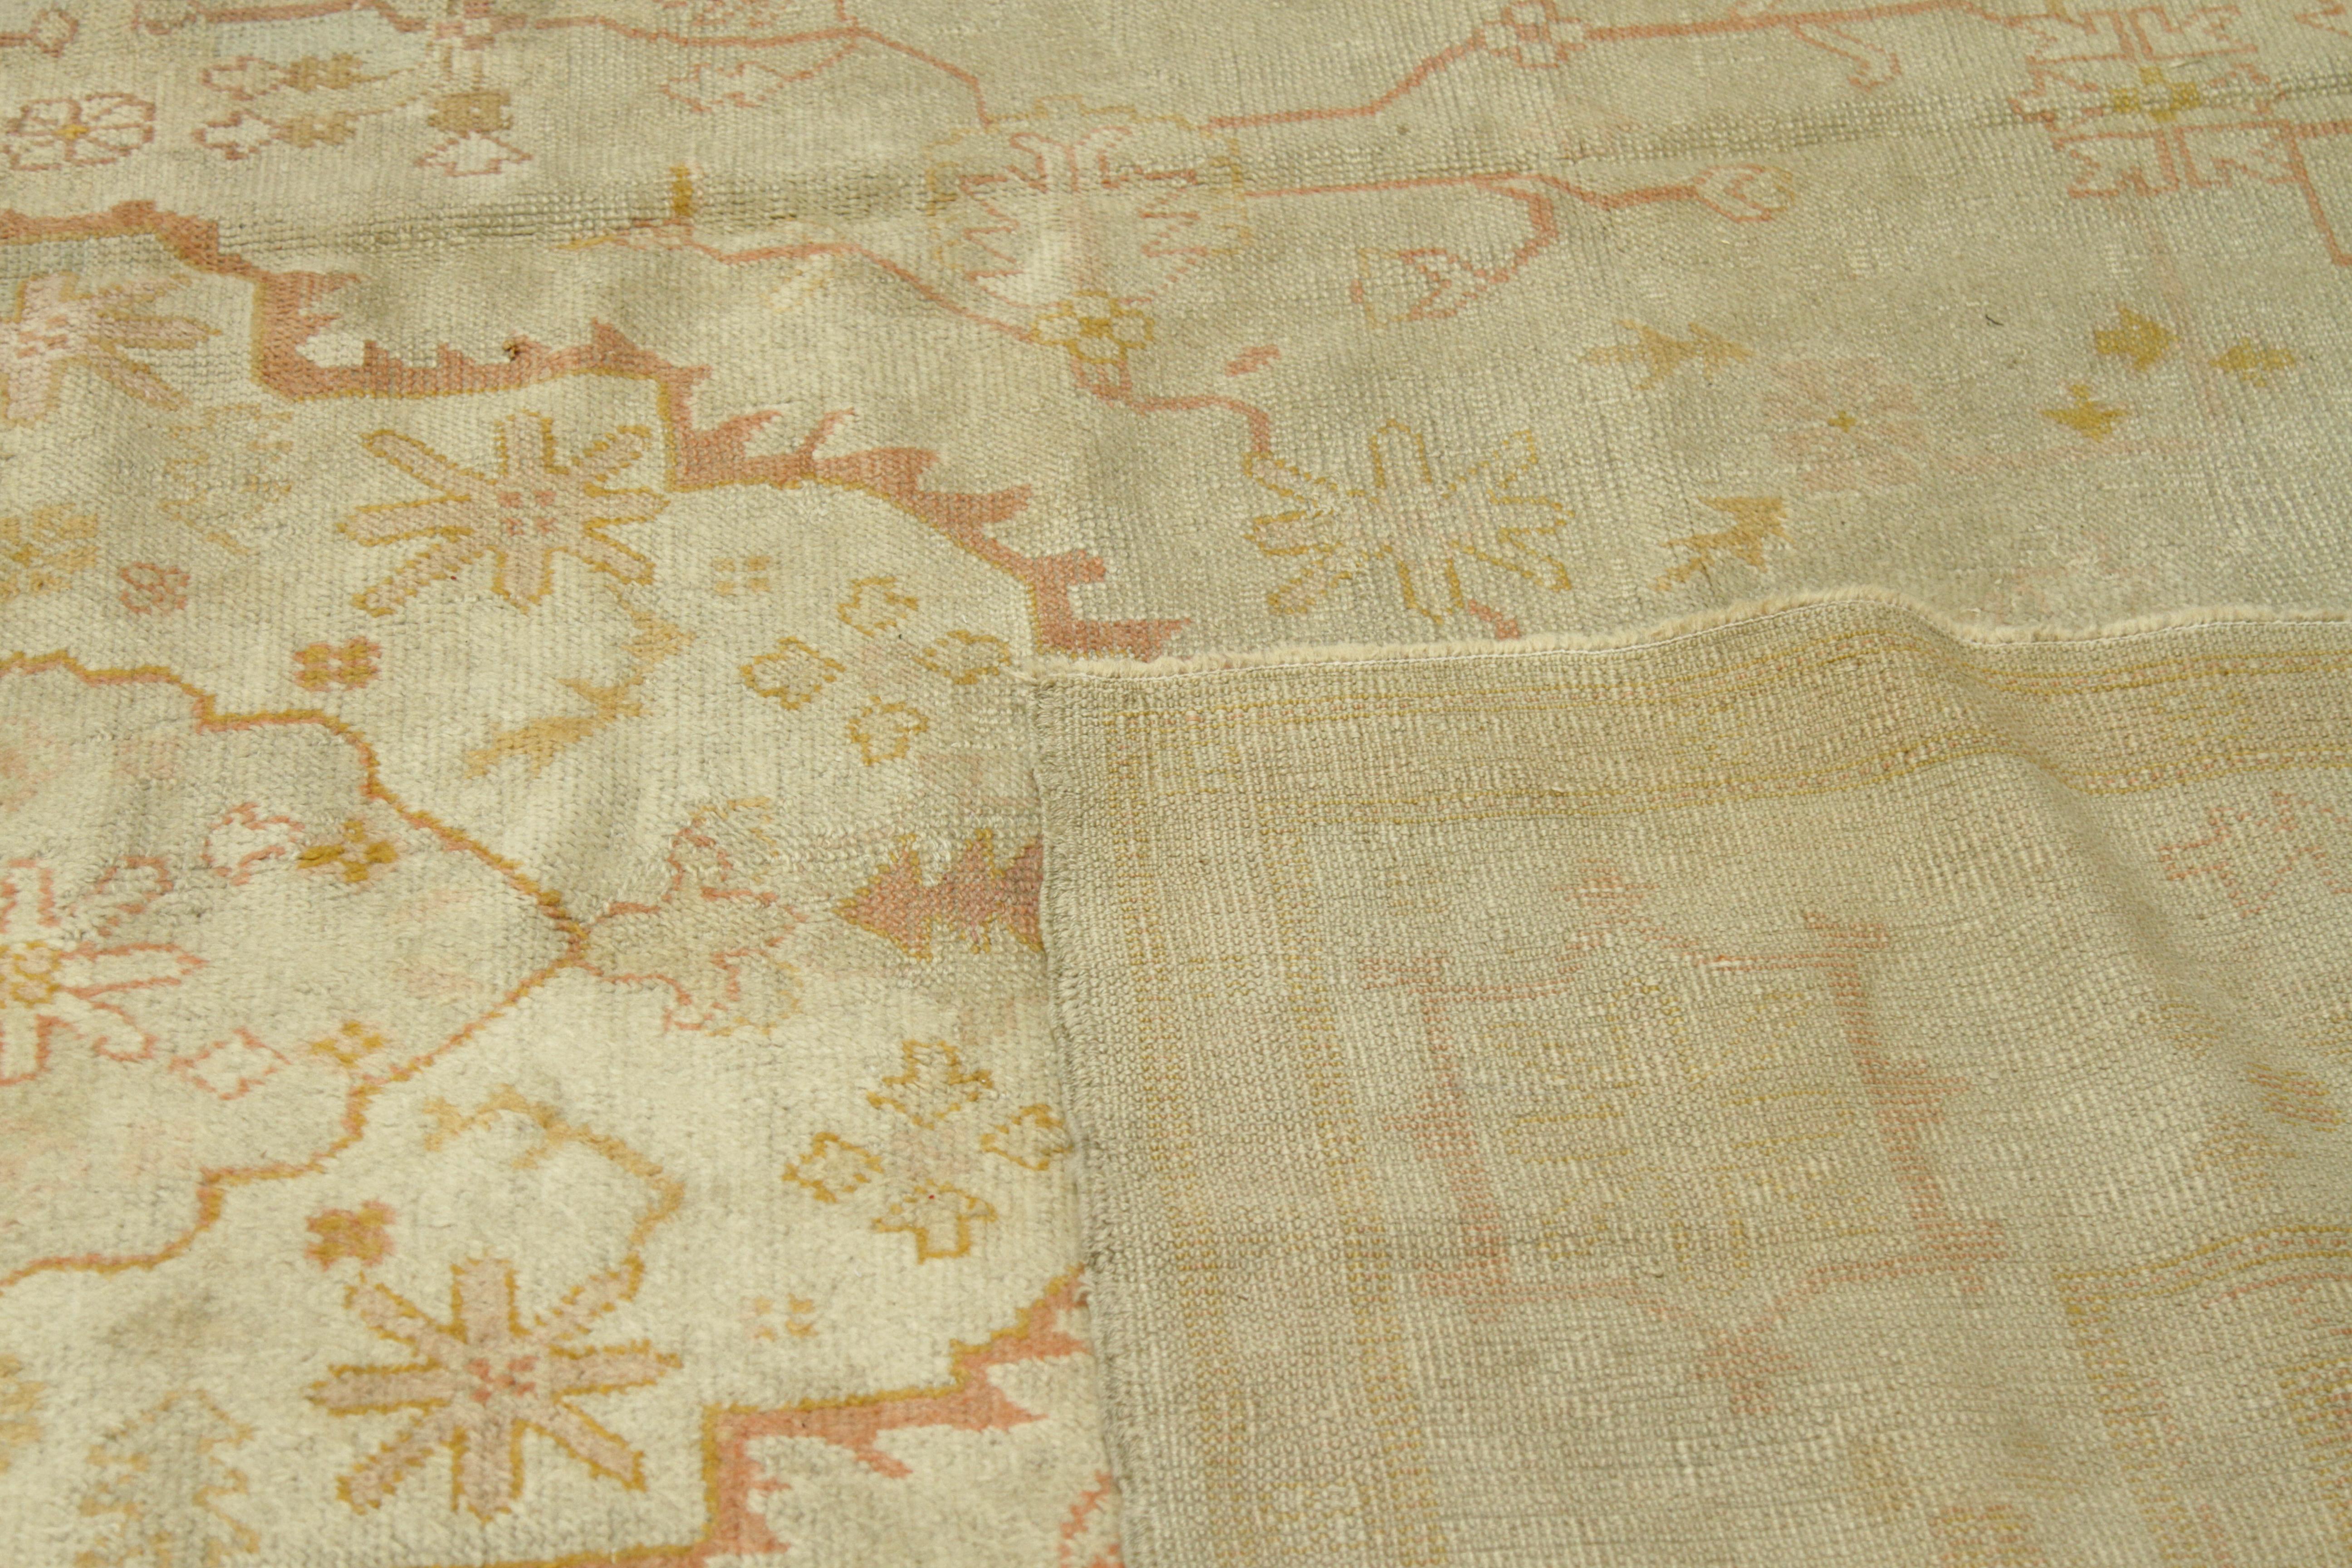 1910s Antique Persian Oushak Rug with Ivory and Beige Flower Field Design For Sale 1